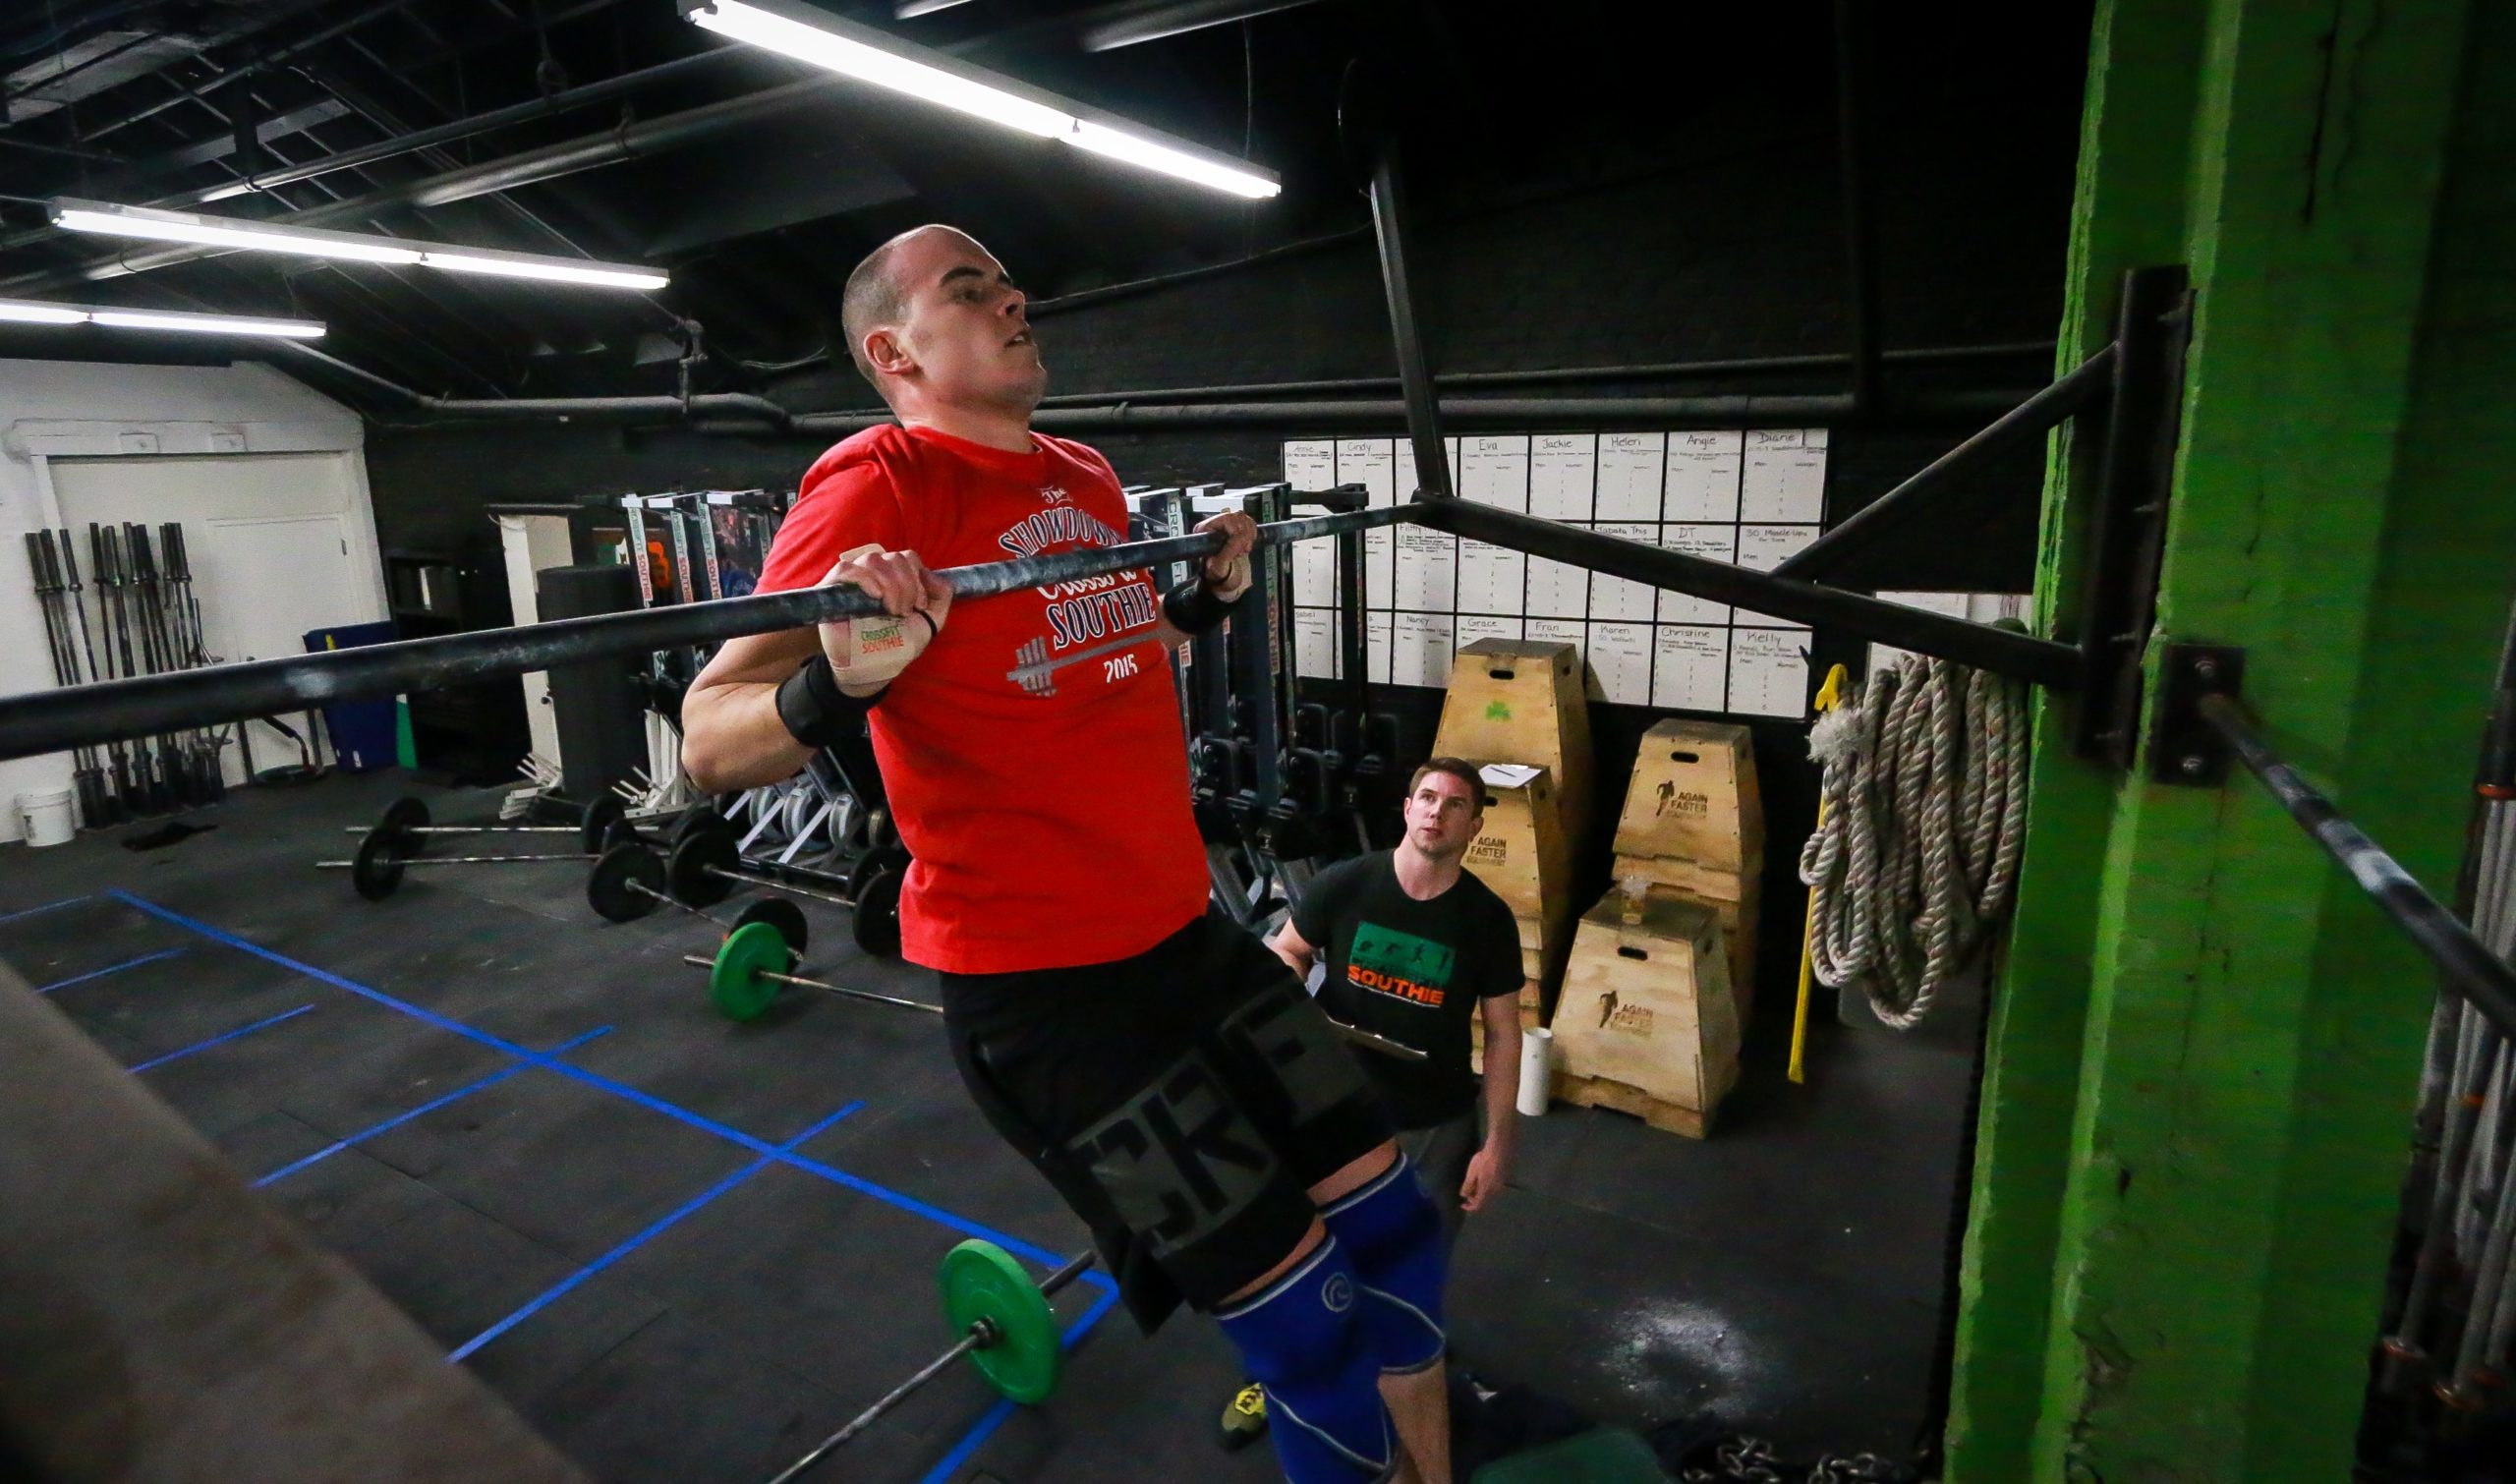 Reebok Shopping Opportunity – CrossFit Southie